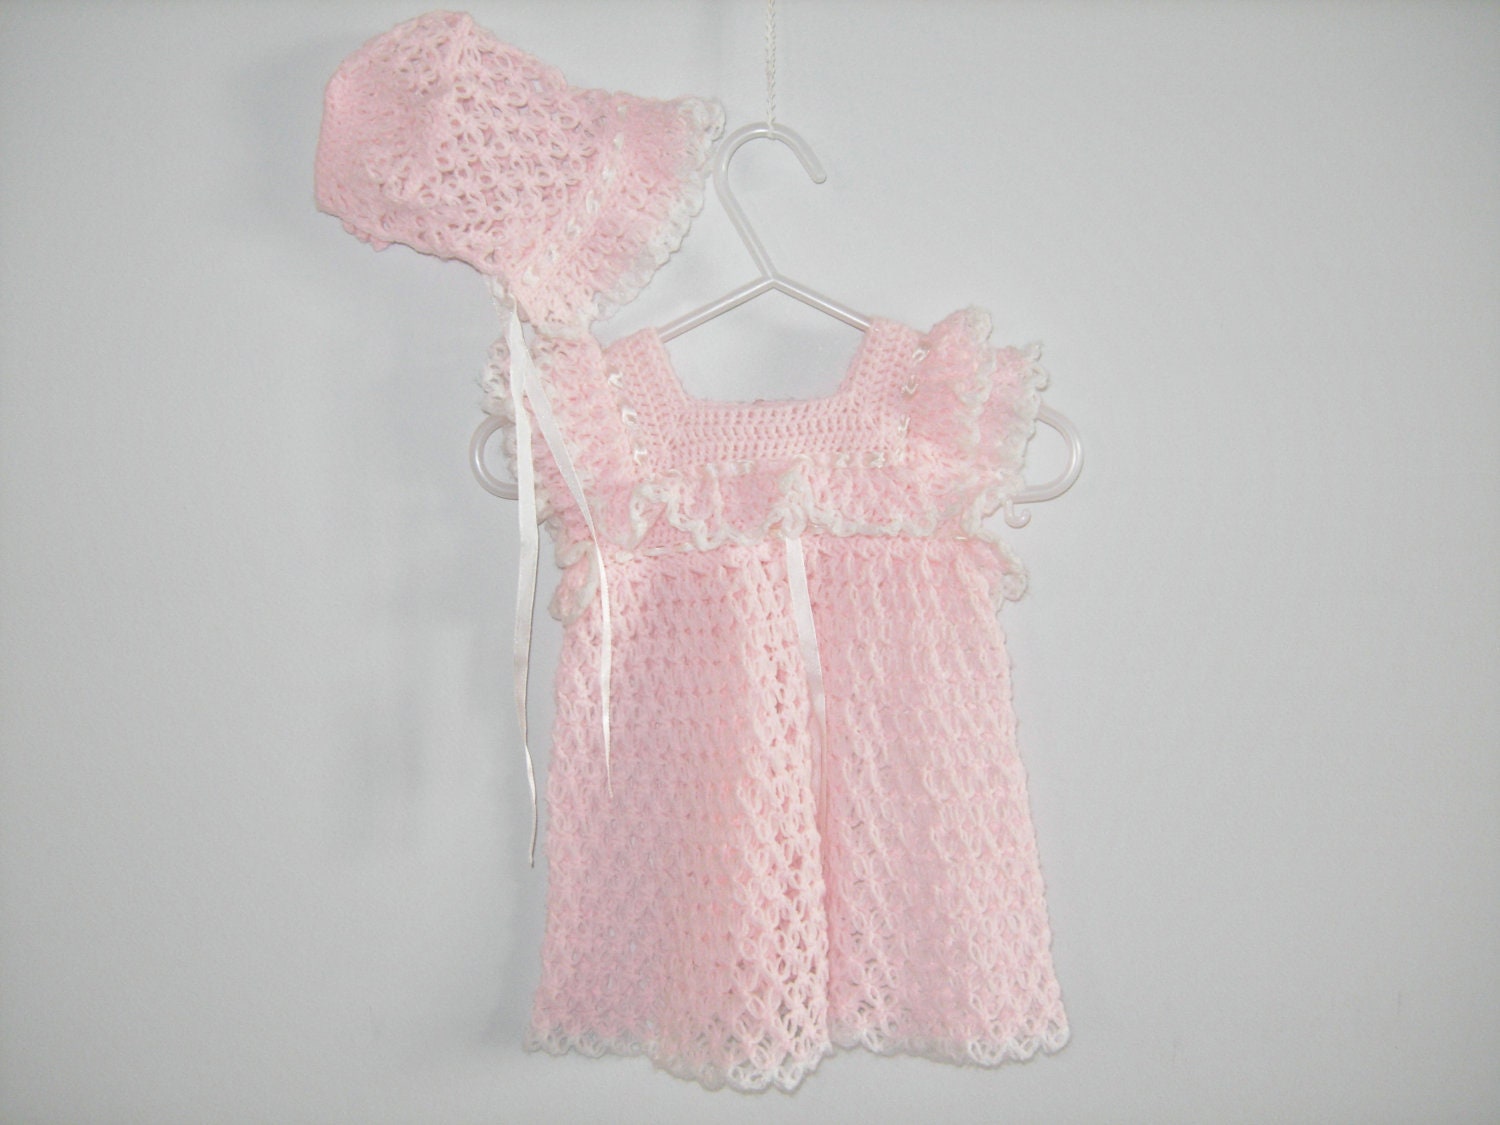 Delicate Pink Knit Dress and Matching Bonnet - Apearsvintagegoodies